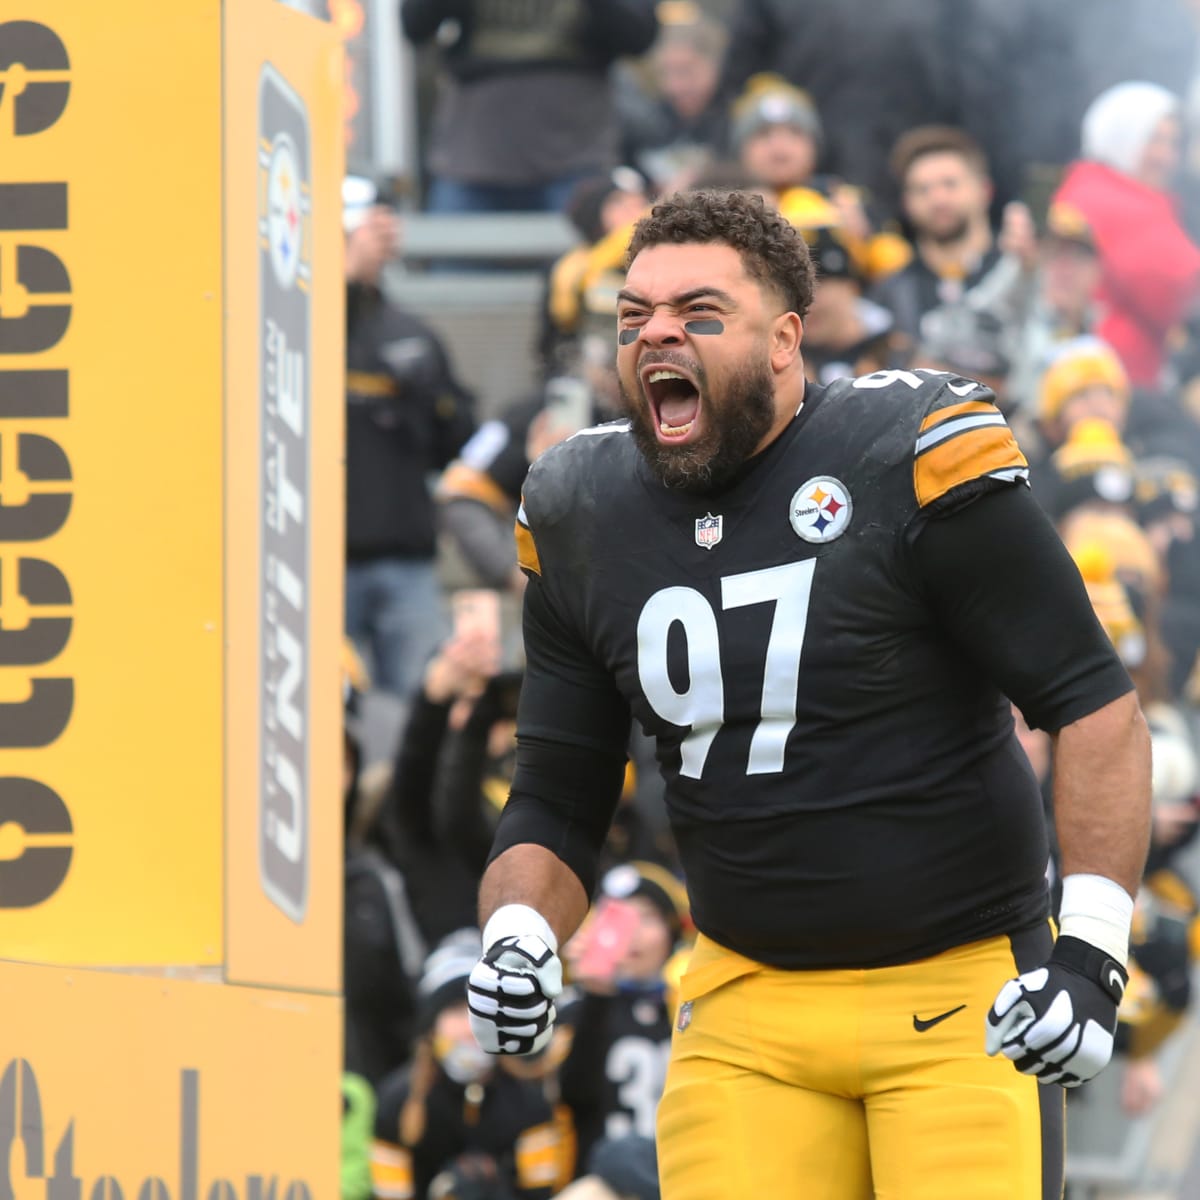 Pittsburgh Steelers' Cameron Heyward Selected as PFWA's 2022 Good Guy Award  Winner - Visit NFL Draft on Sports Illustrated, the latest news coverage,  with rankings for NFL Draft prospects, College Football, Dynasty